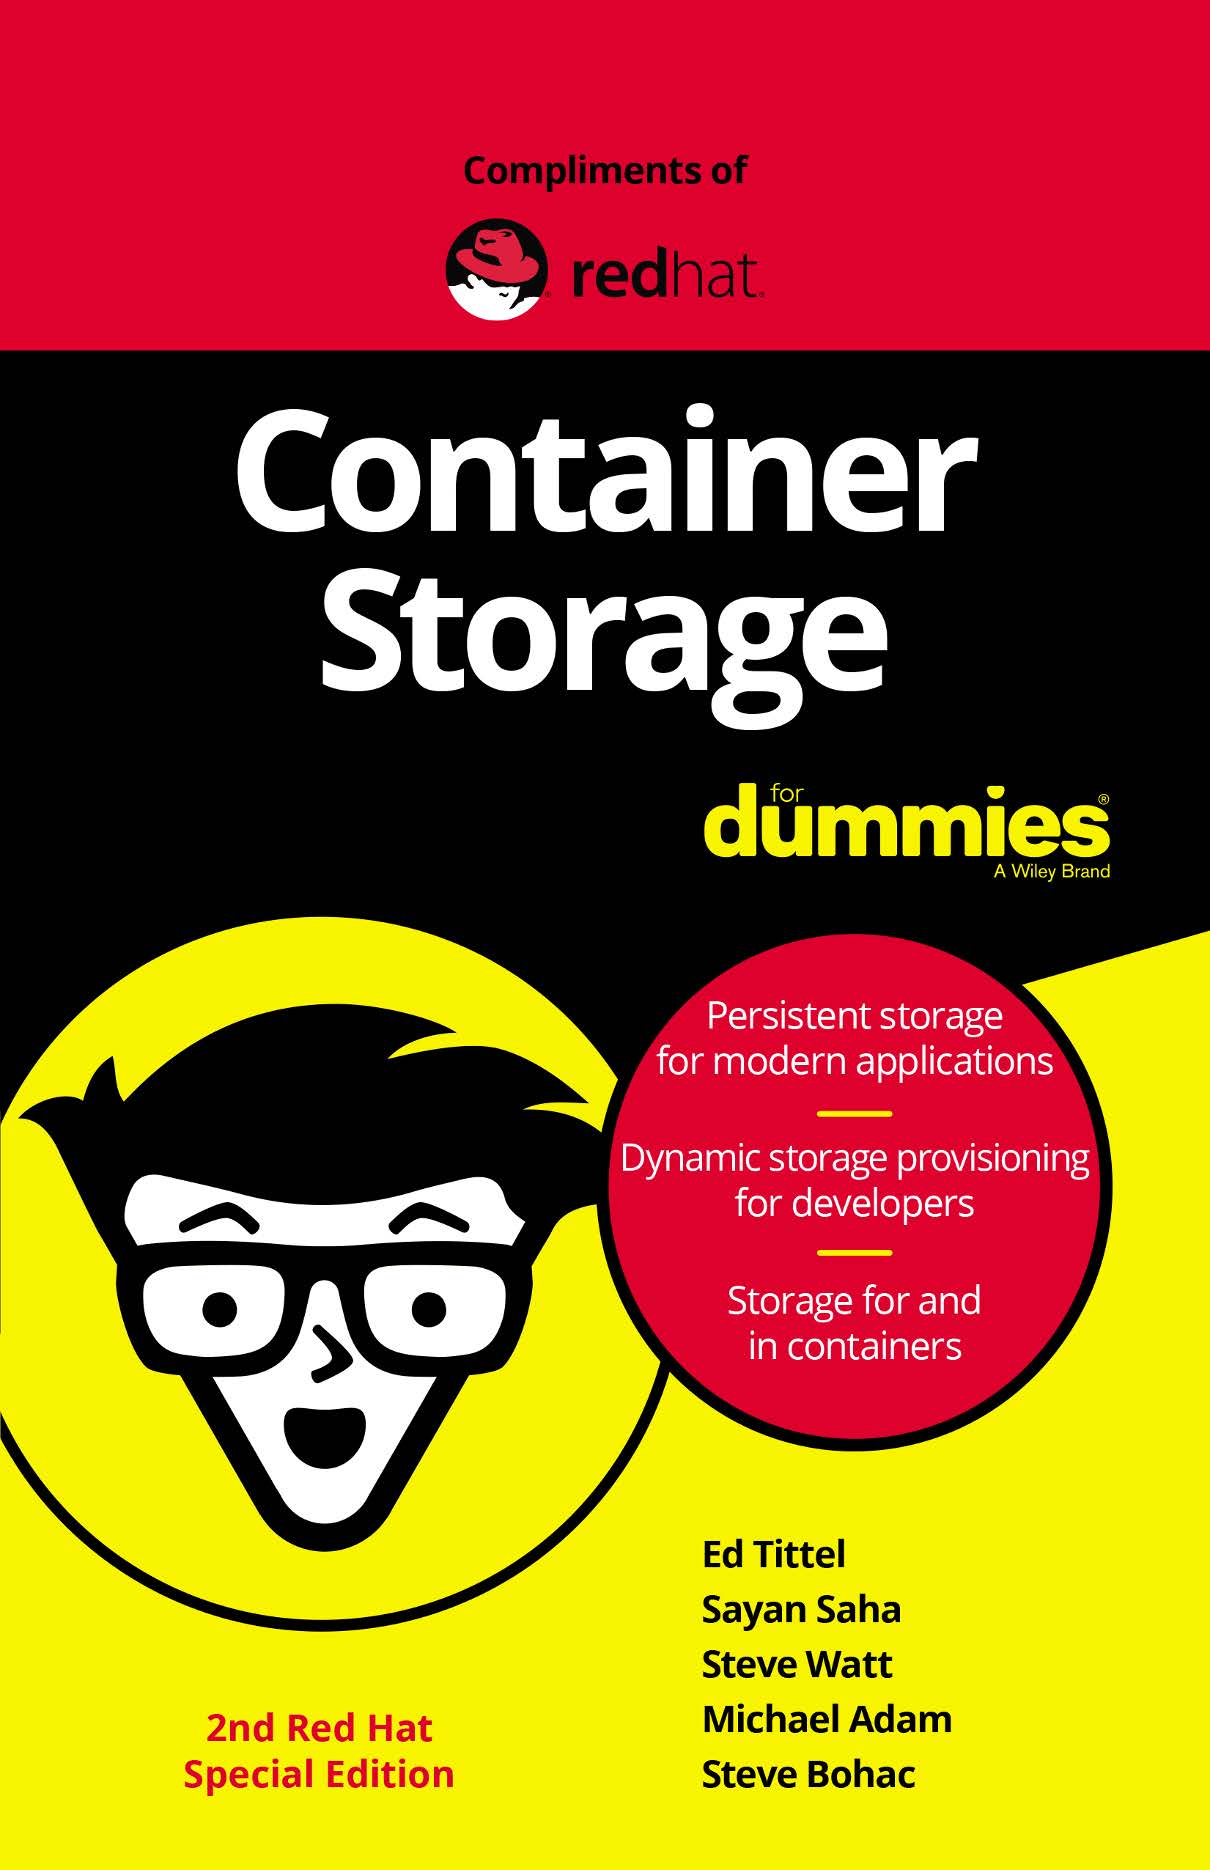 st-container-storage-for-dummies-ebook-f16476bf-201902-en_Page_01